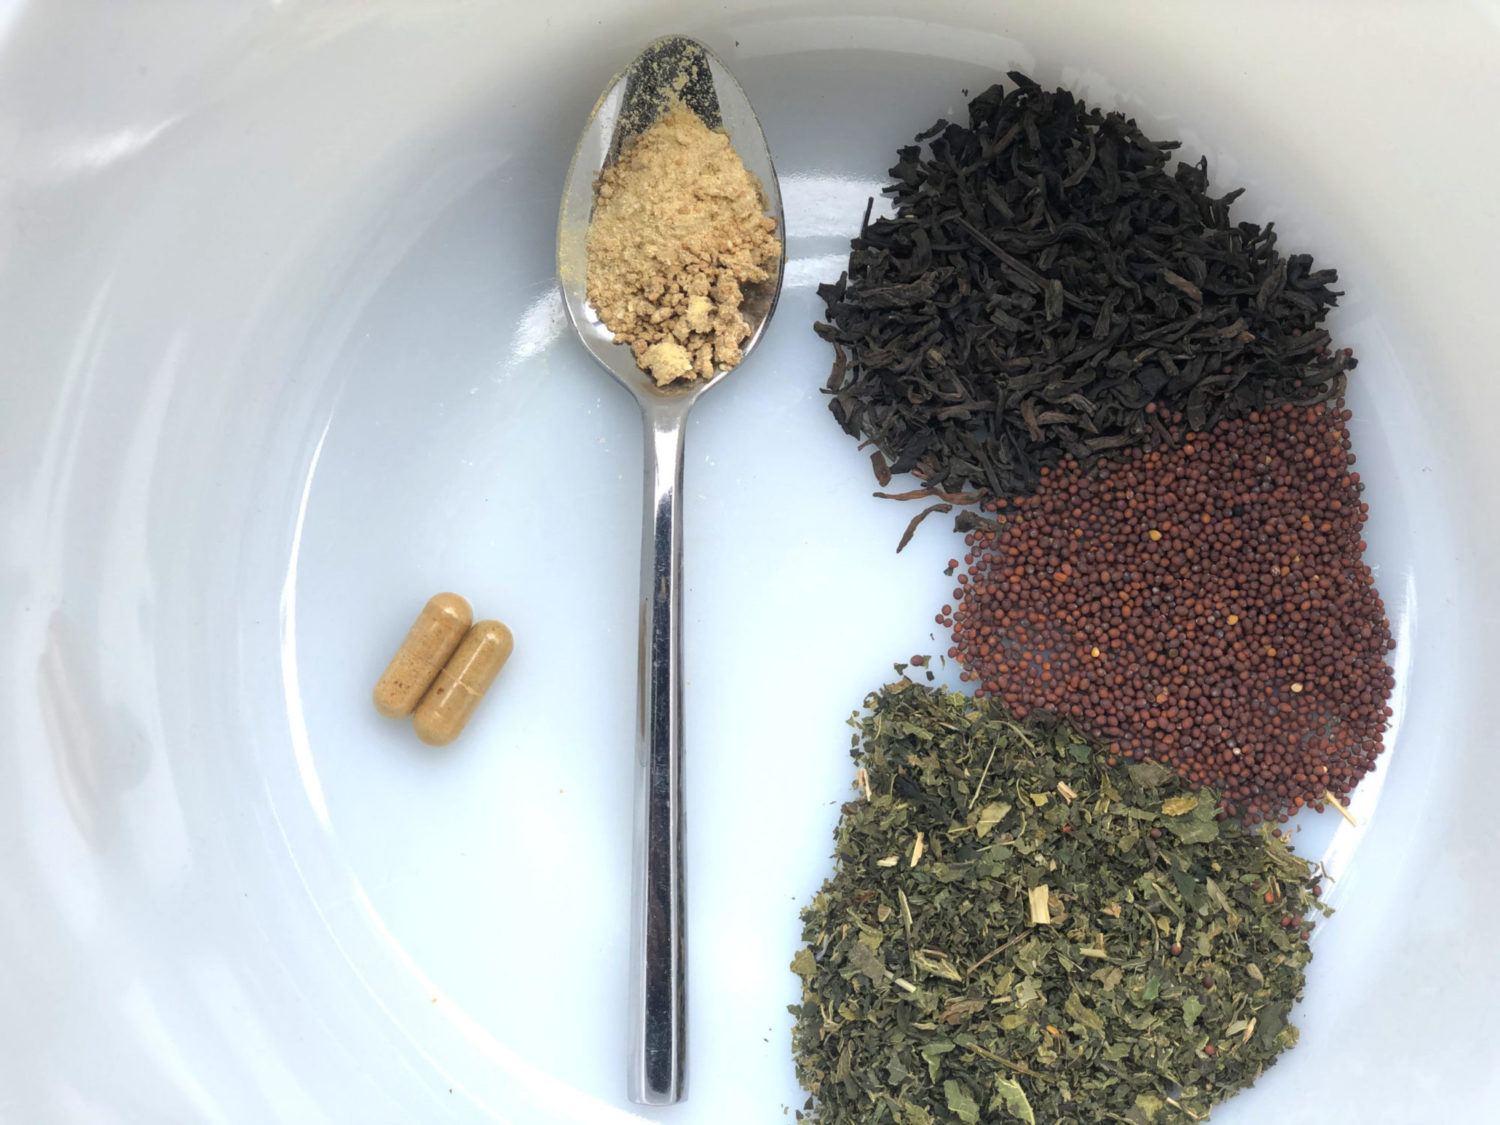 A Vivacity Acupuncture photograph showing different custom herbal formulations: two capsules on the left, a spoon with powdery granules in the center and whole herbs as a loose leaf blend on the right.